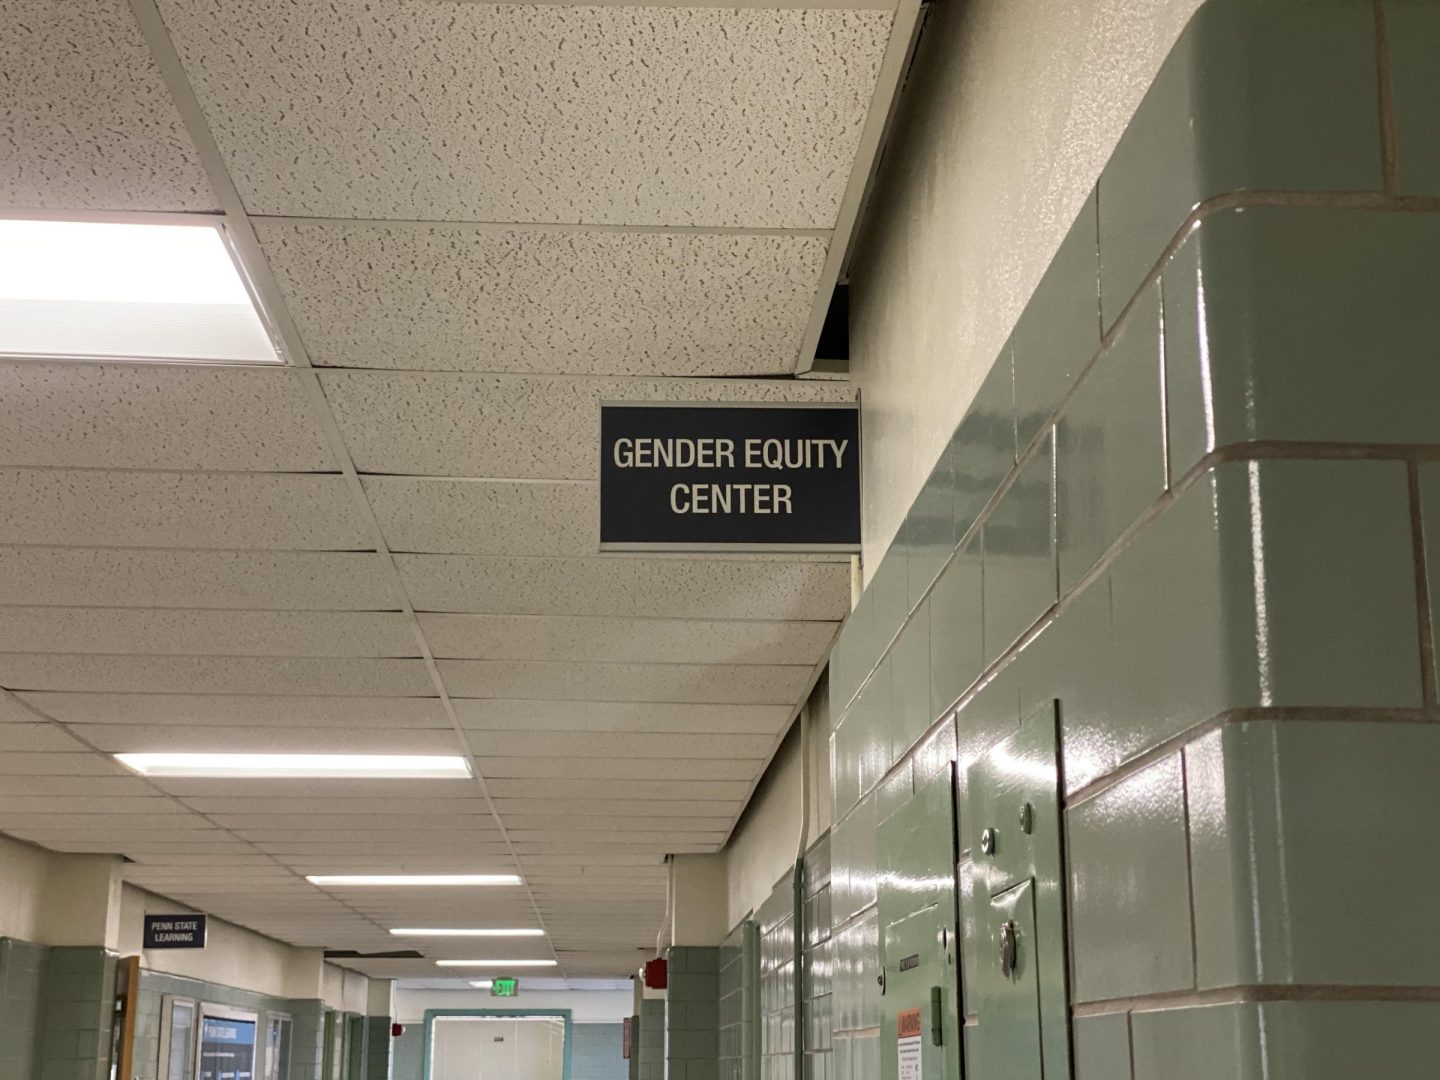 Penn State's Gender Equity Center is located in 204 Boucke Building.
